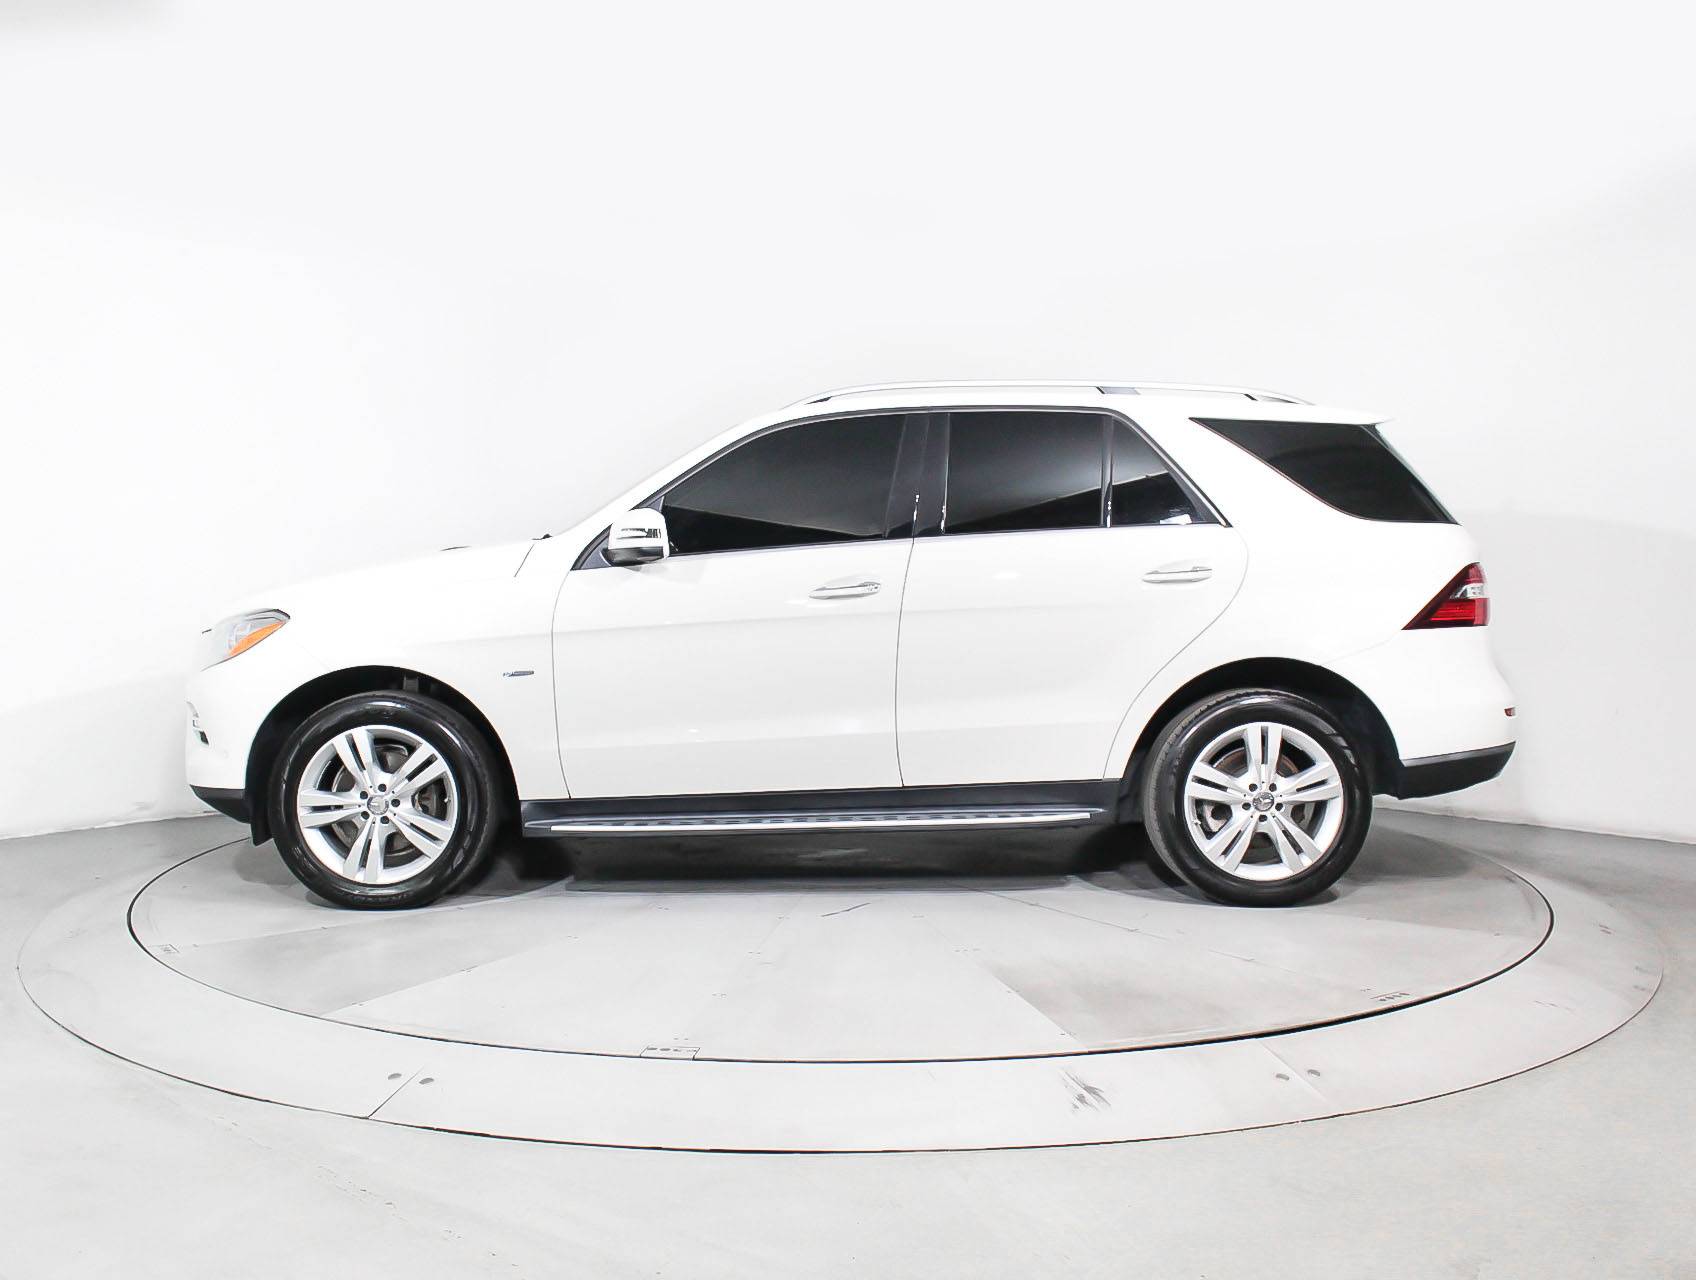 Florida Fine Cars - Used MERCEDES-BENZ M CLASS 2012 HOLLYWOOD Ml350 4matic Awd